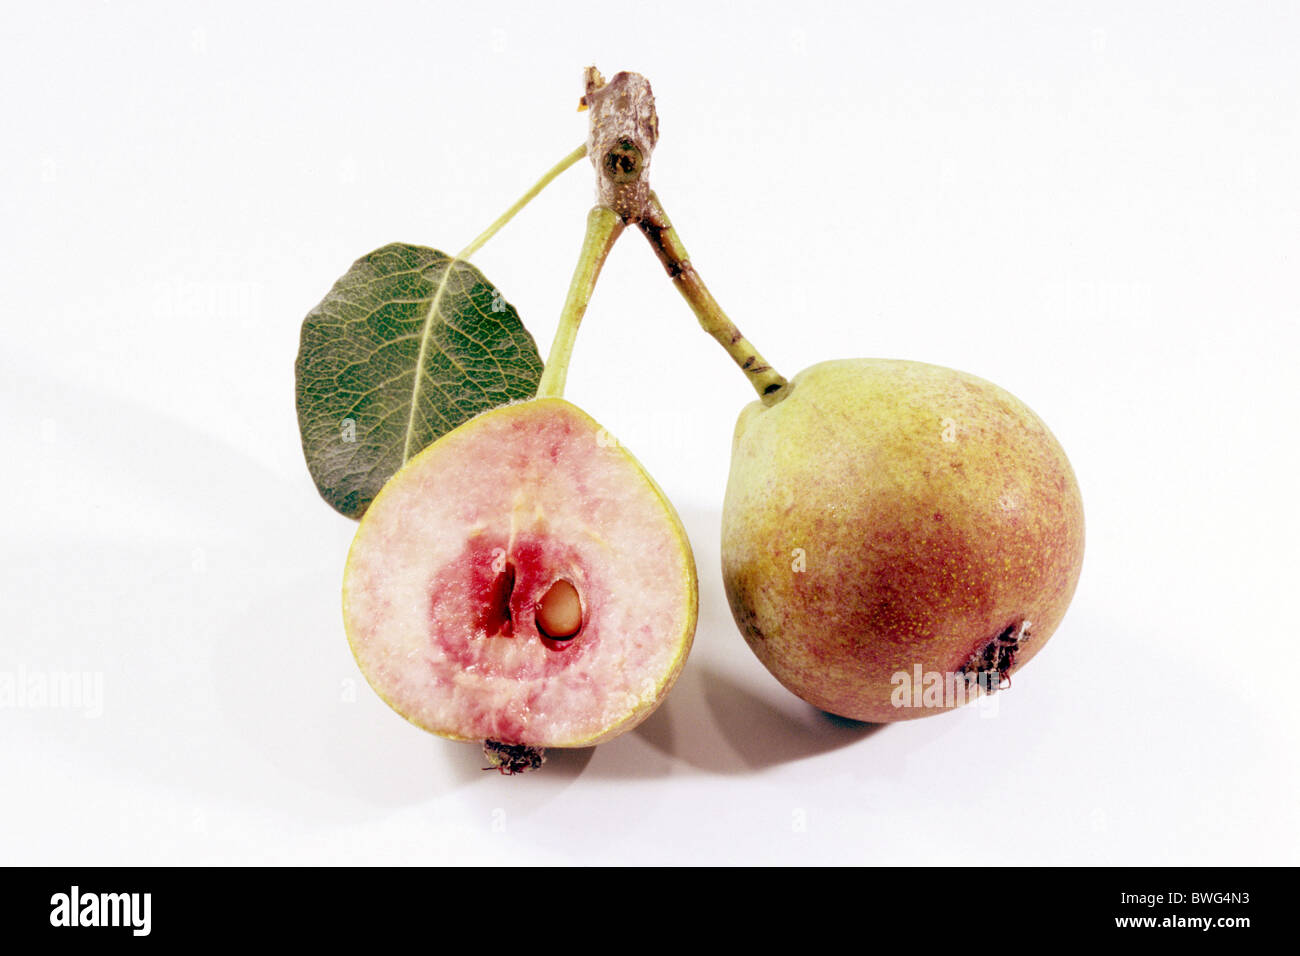 Pear (Pyrus communis), variety: Blutbirne, whole and halved fruit, studio pciture. Stock Photo